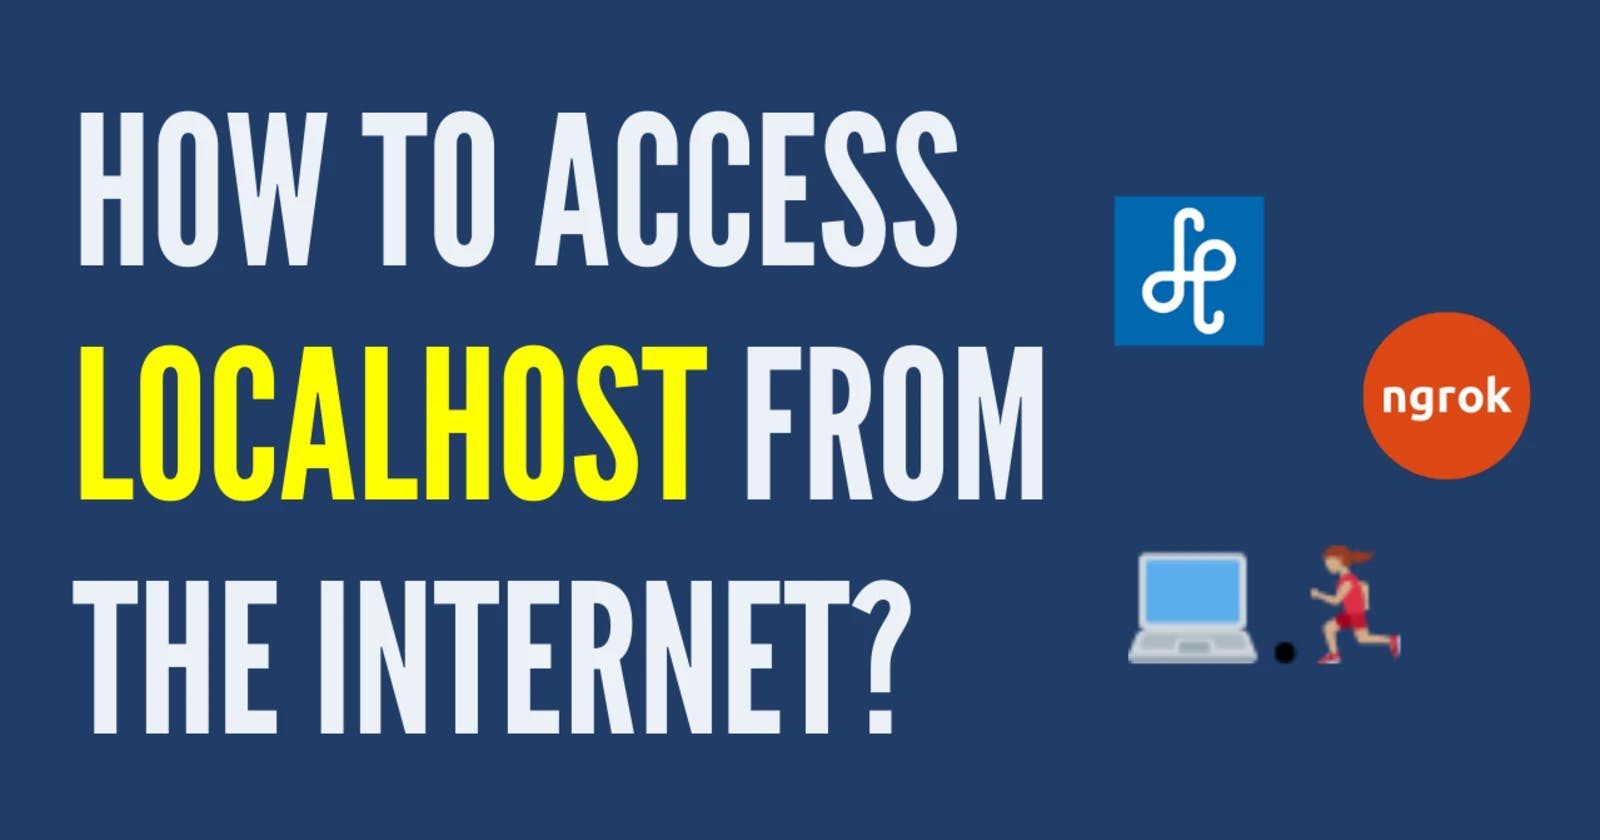 How many ways can we access localhost in browser?